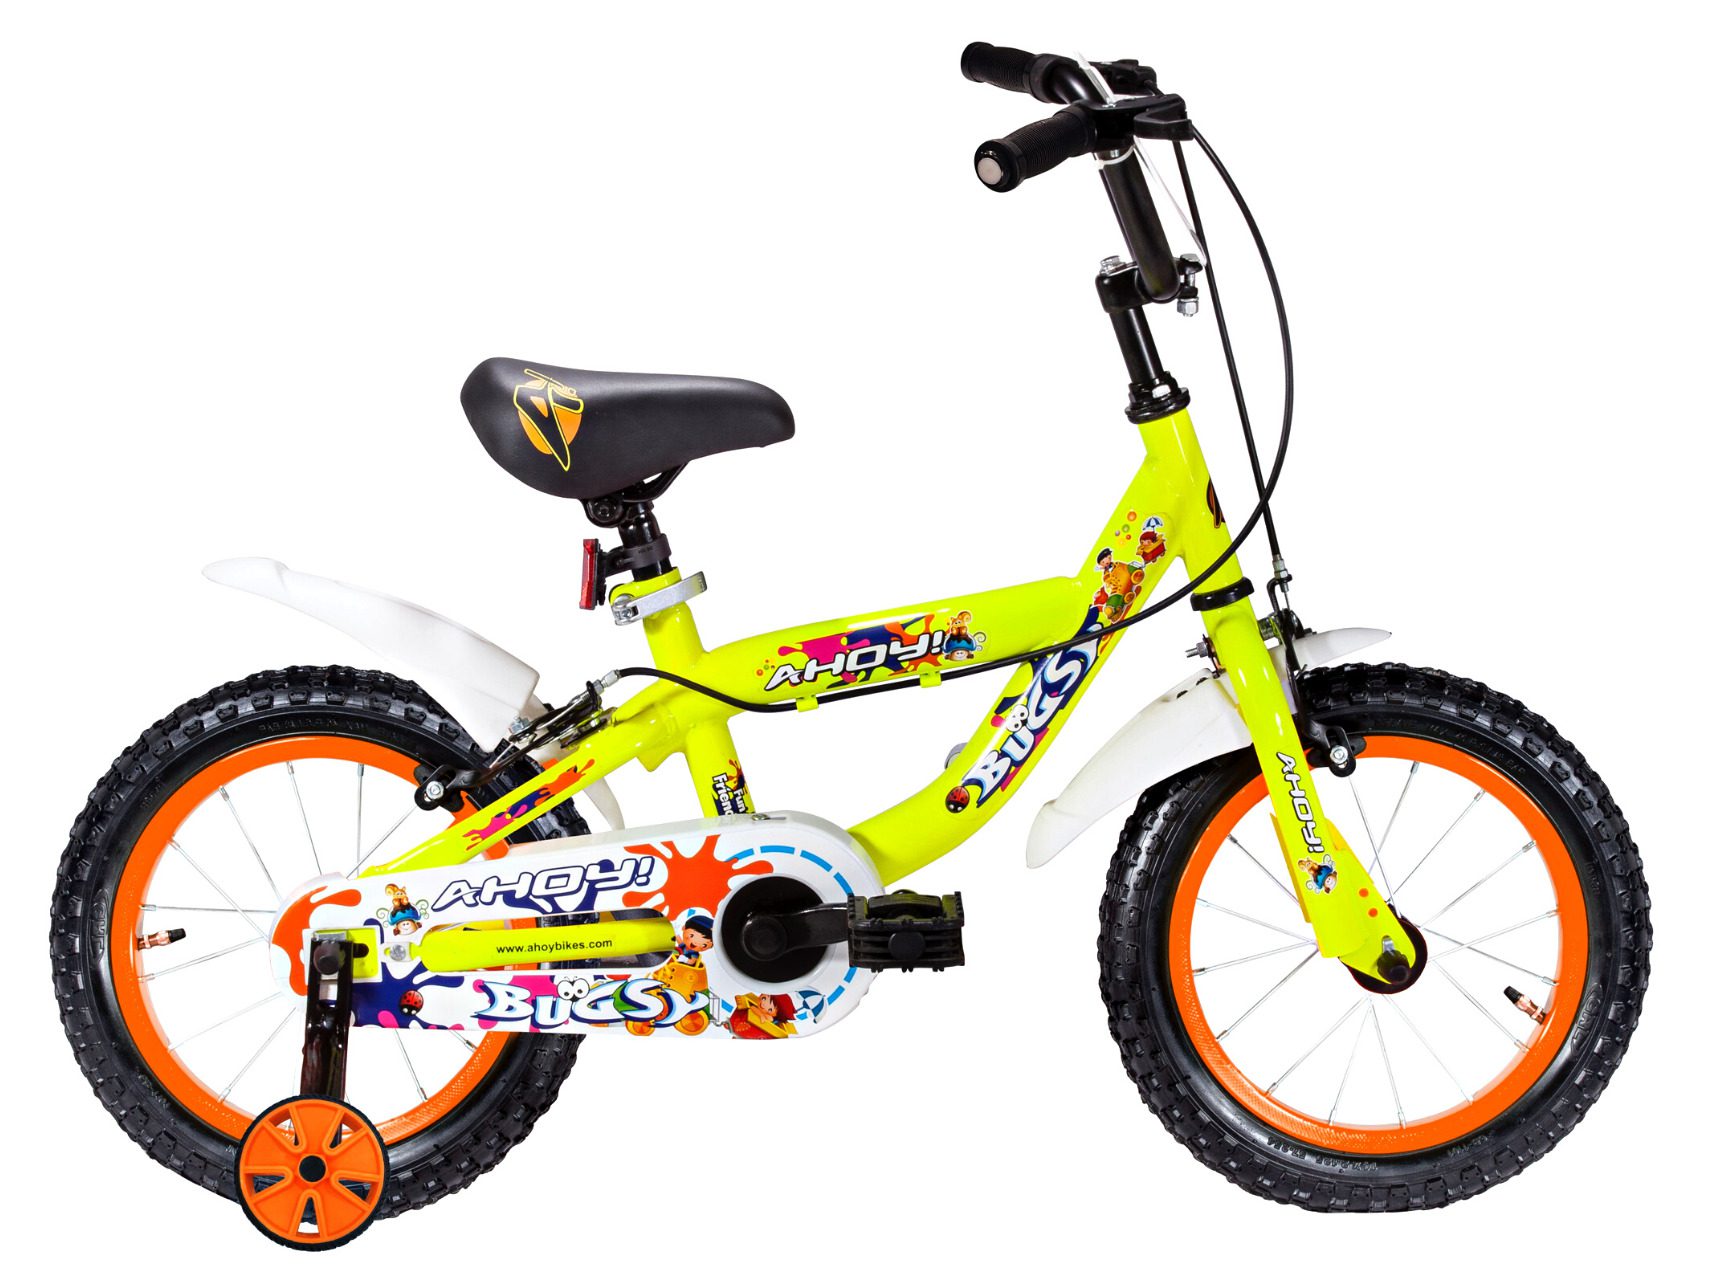 Bugsy kids bike single speed 14T | buy yellow cycle non gear for girls